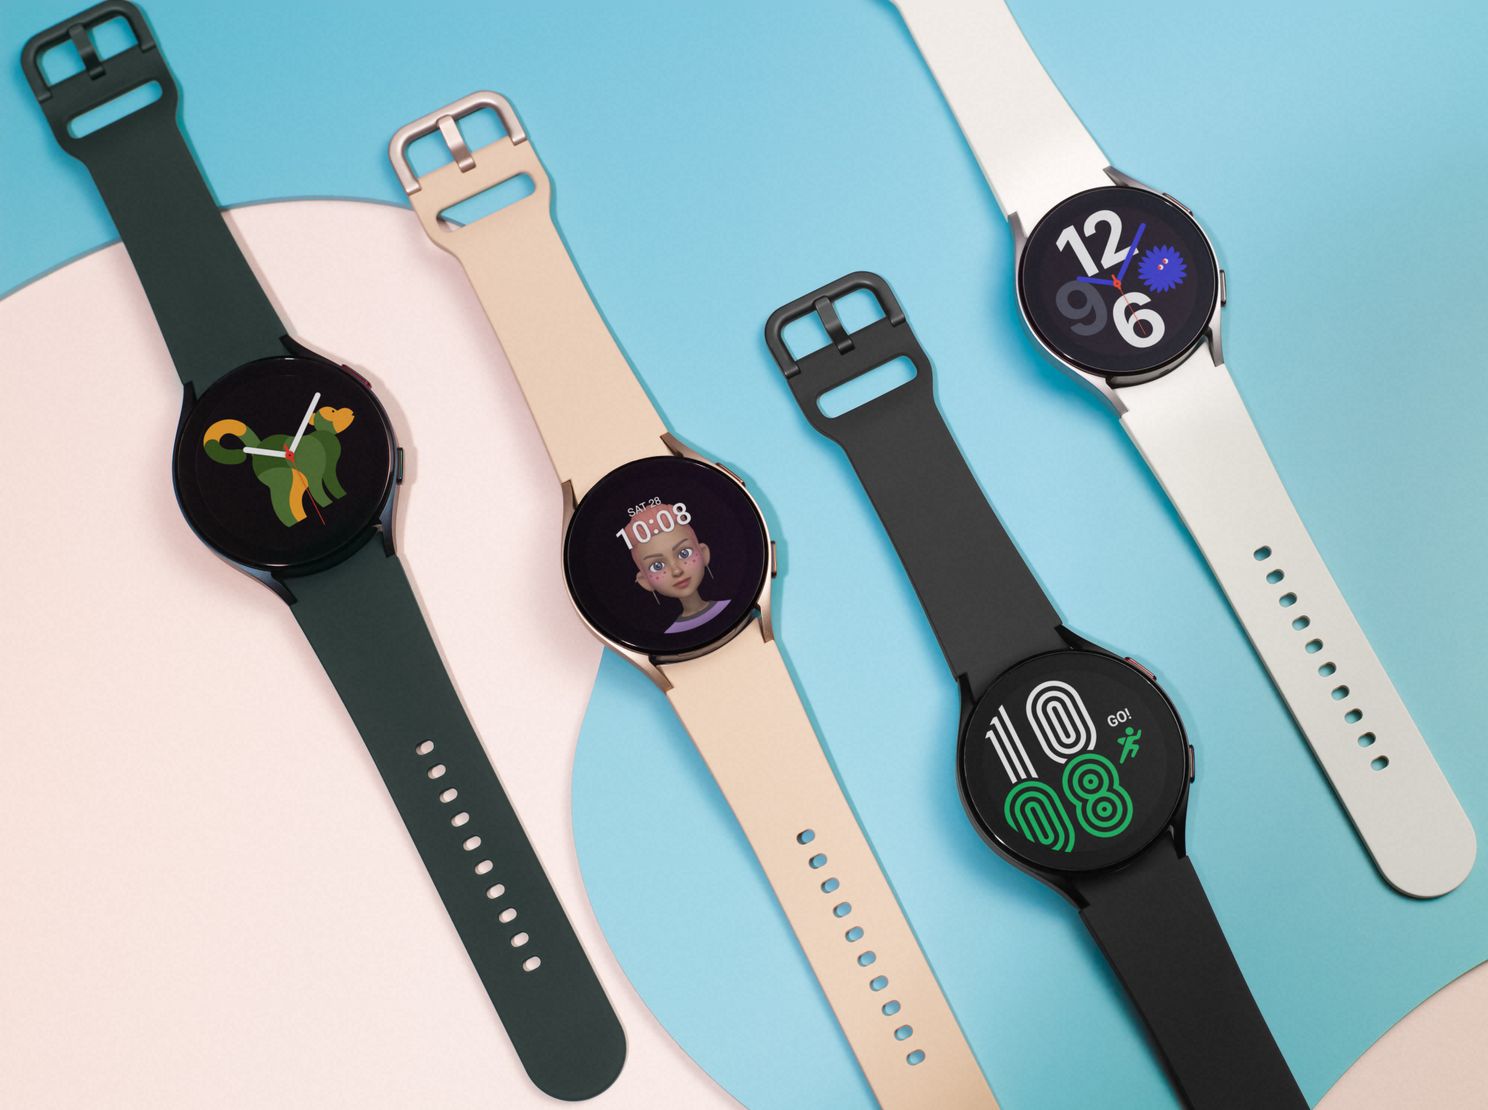 The Samsung Galaxy Watch 4 in different colors